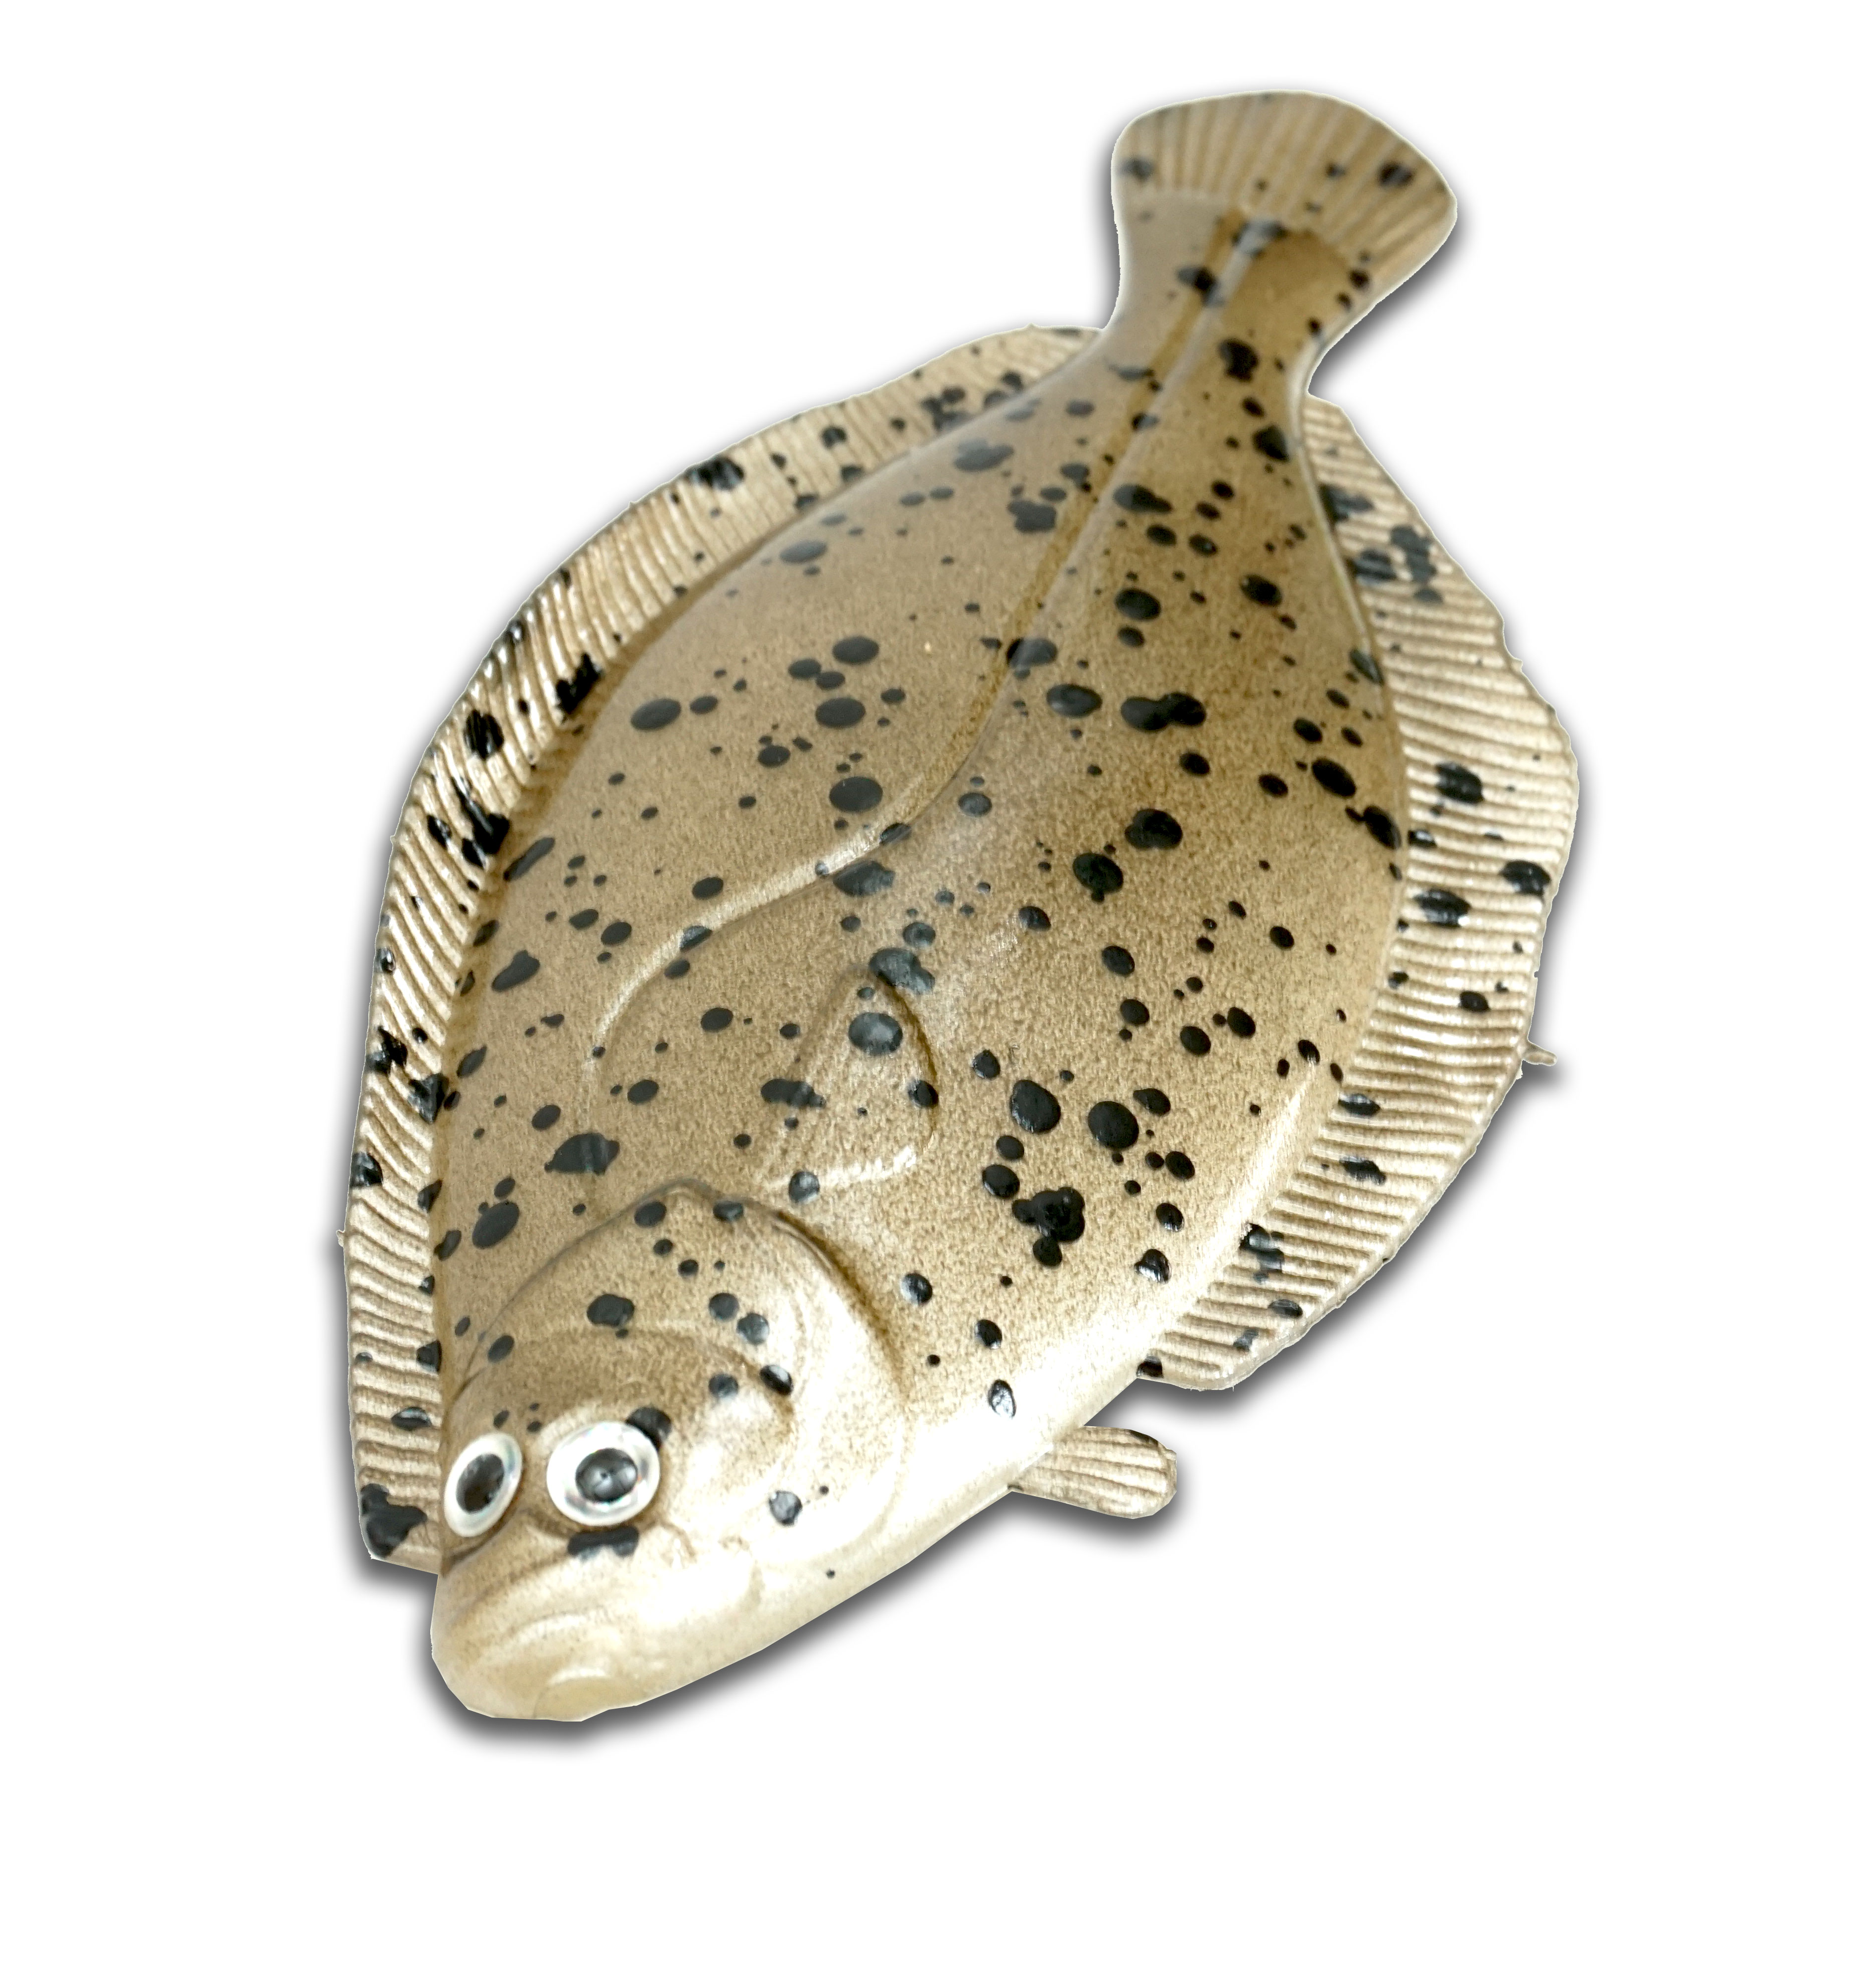 Artificial Flounder 5 Light Spotted - Almost Alive Lures